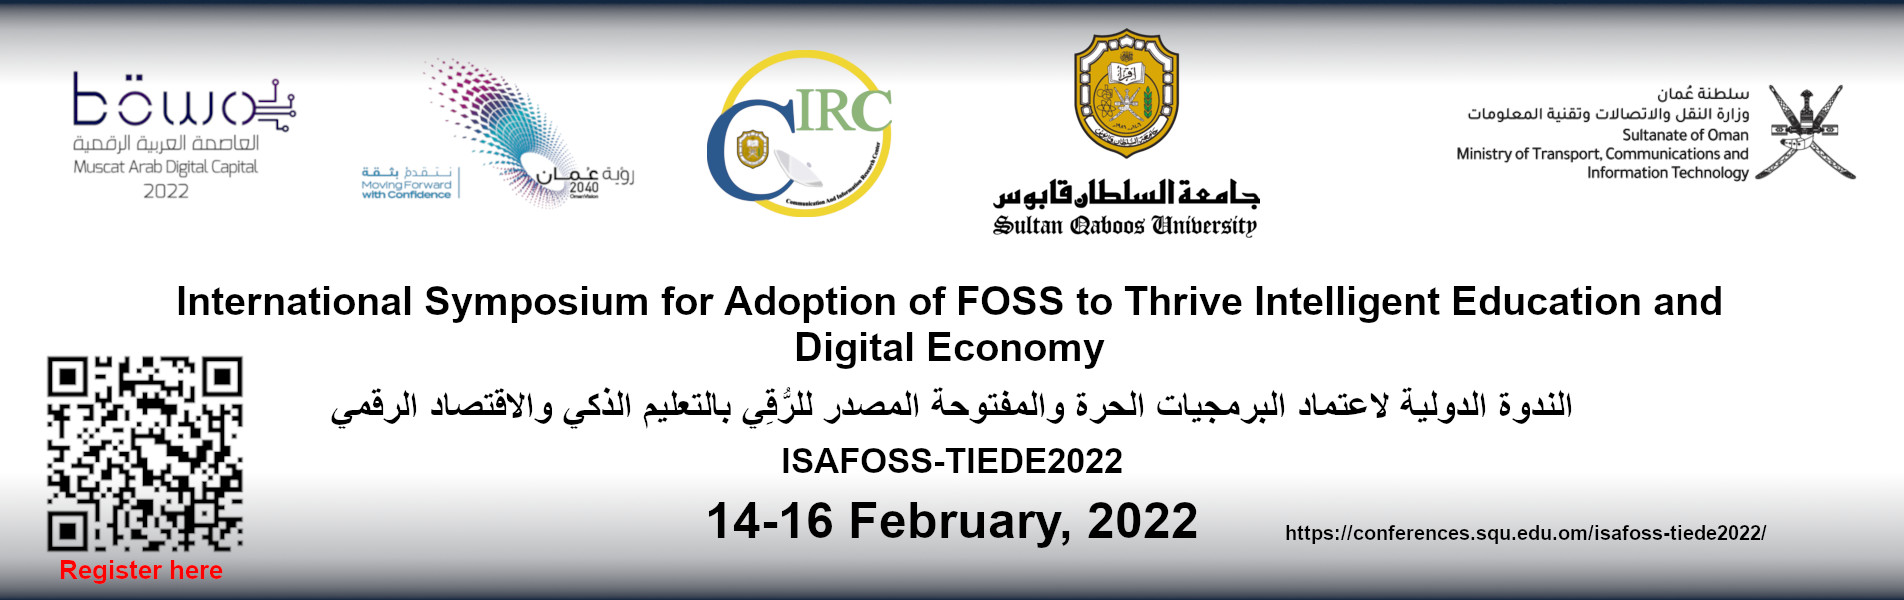 FOSS in Educational Systems & Digital Economy